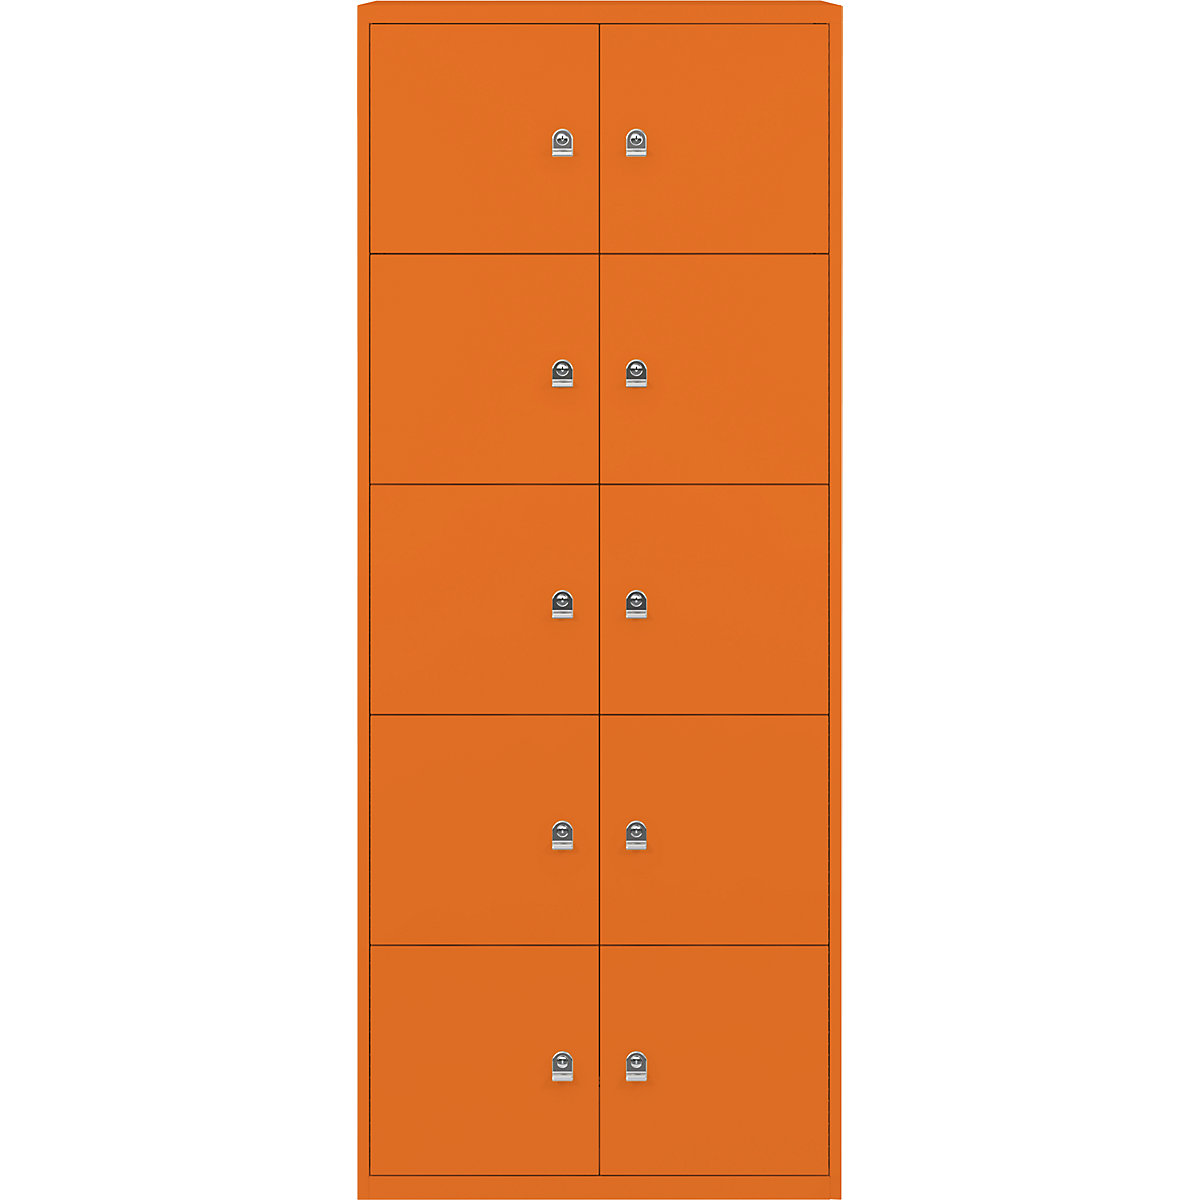 LateralFile™ lodge – BISLEY, with 10 lockable compartments, height 375 mm each, orange